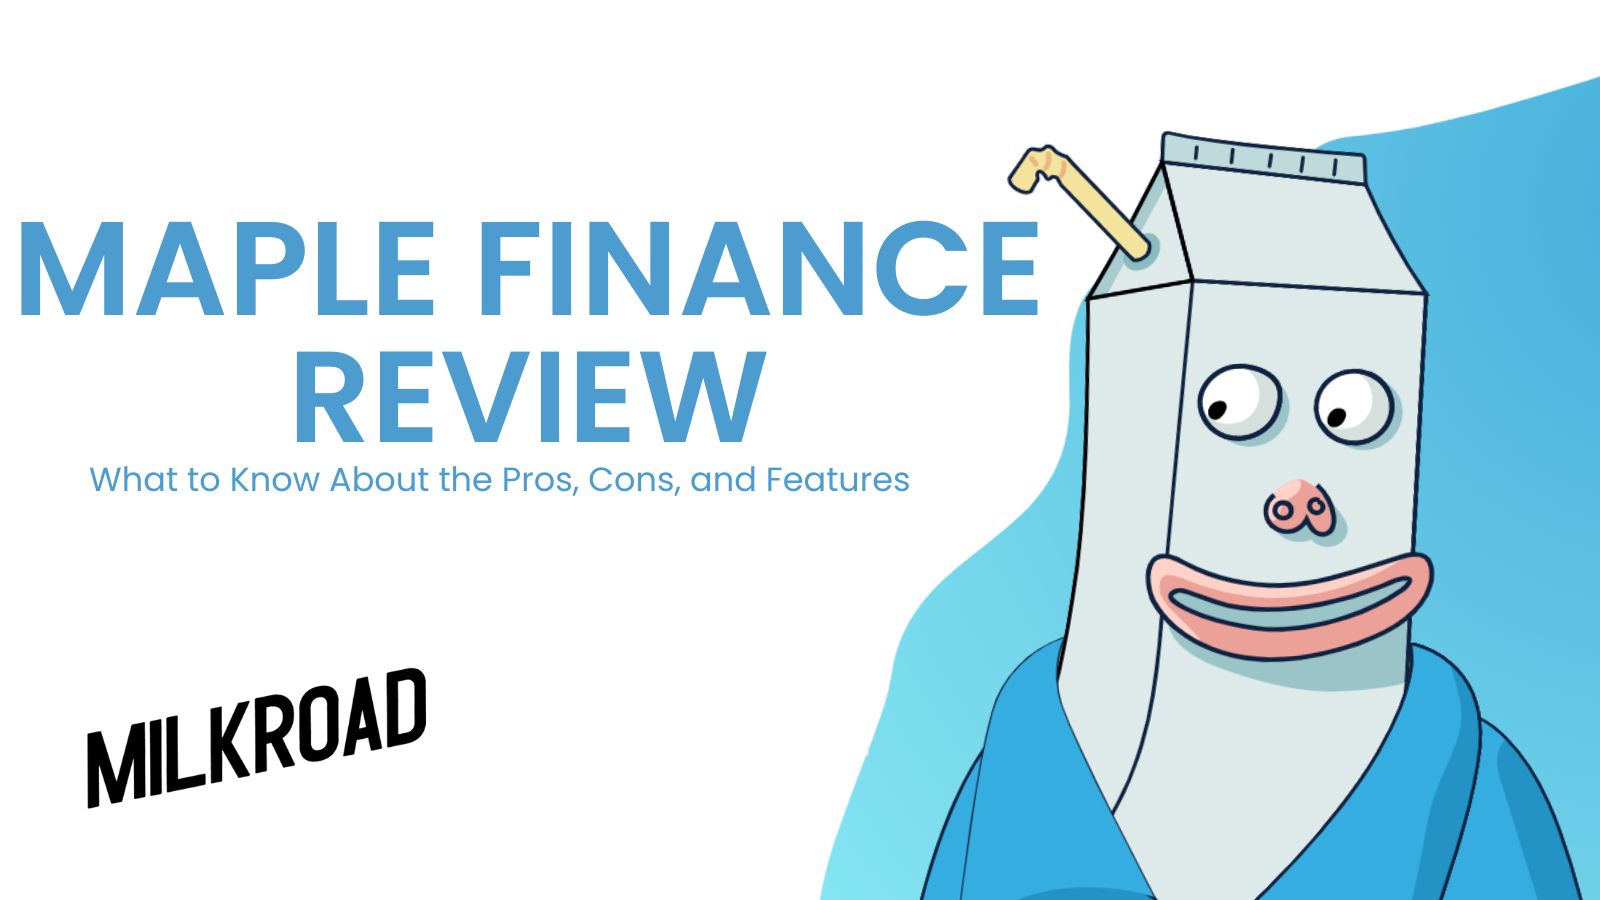 Maple Finance Review